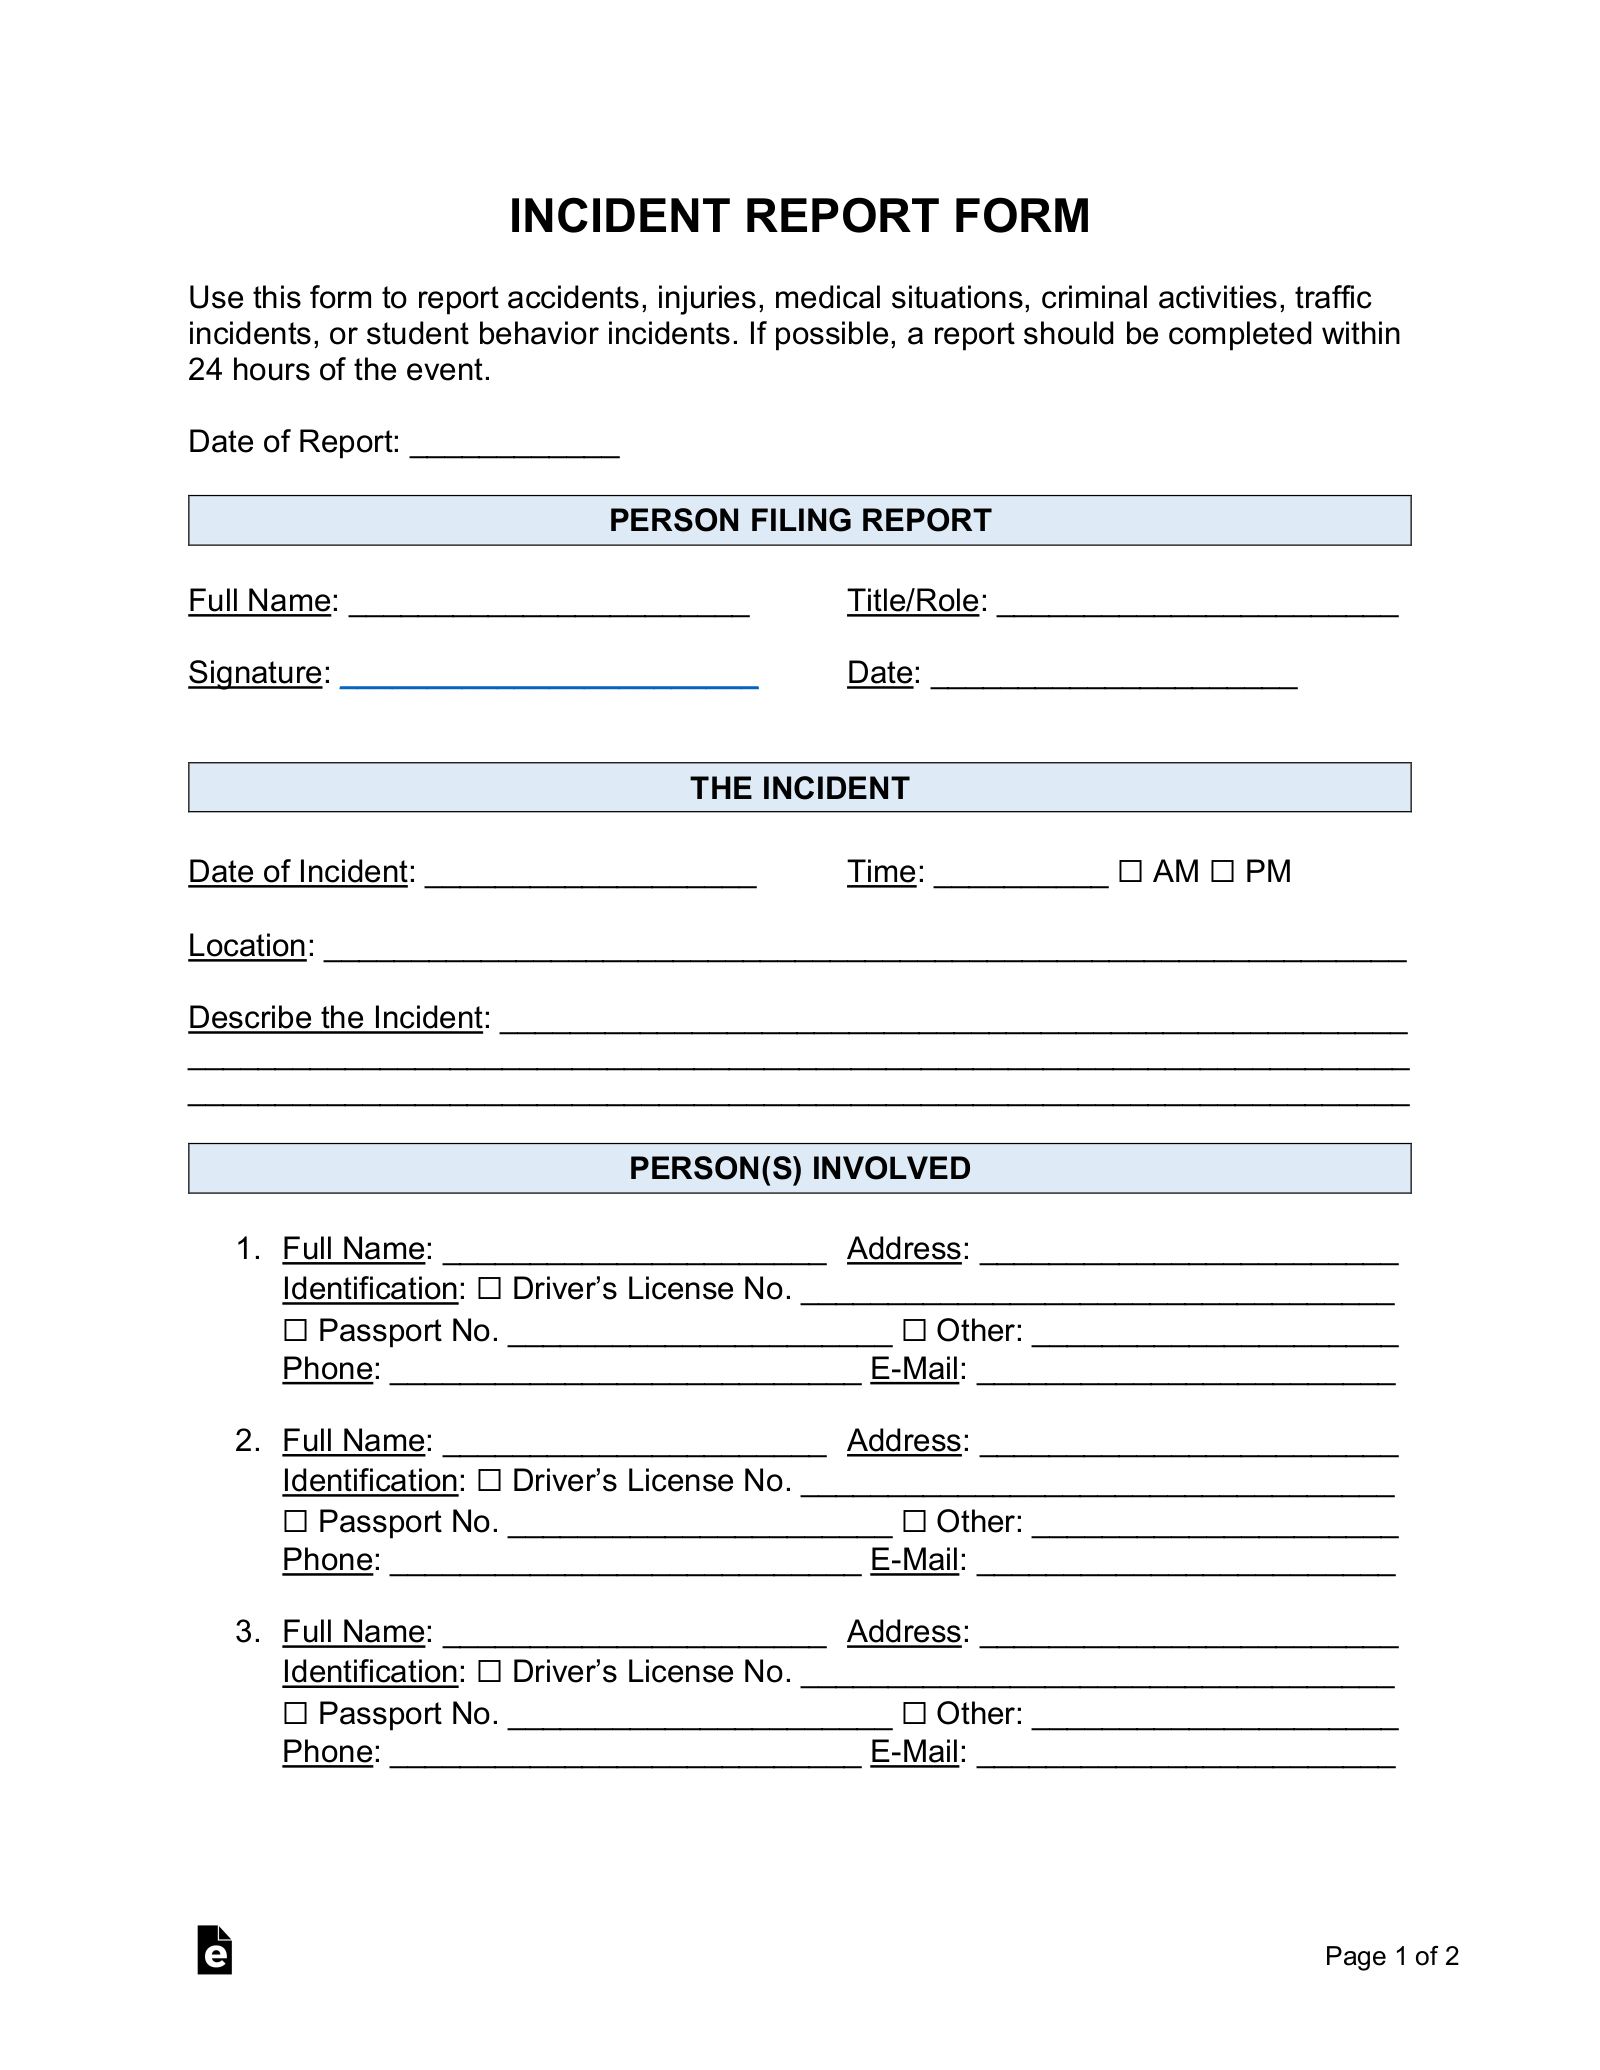 Free Incident Report Templates 18 Sample Pdf Word Eforms 2688